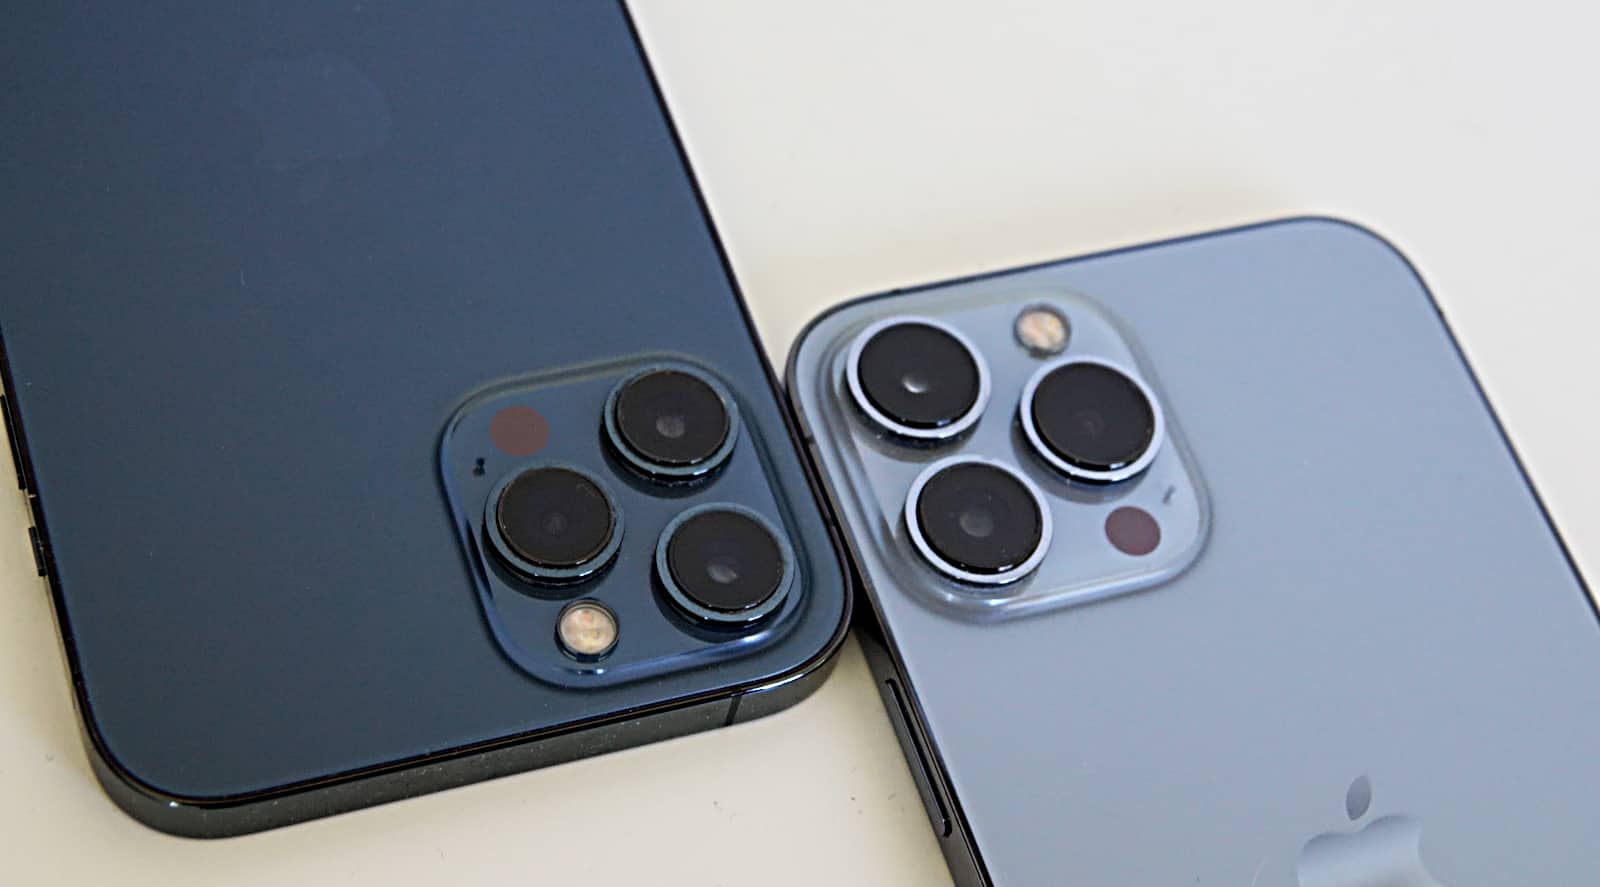 The cameras of the Apple iPhone 12 Pro Max (left) versus the iPhone 13 Pro Max (right).